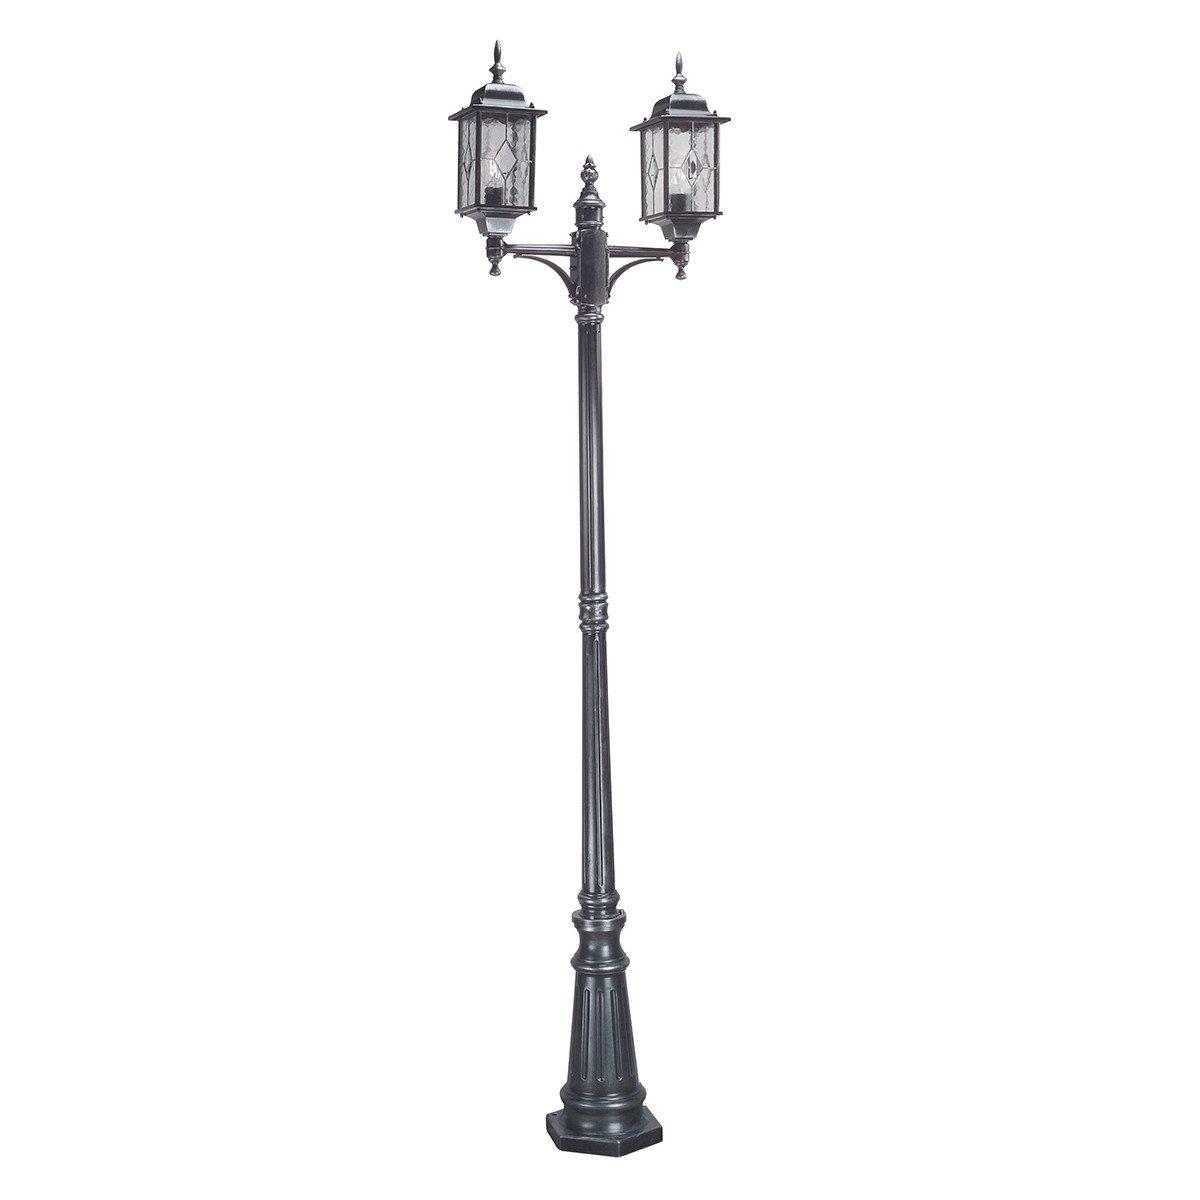 Wexford 2 Light Outdoor Lamp Post Black Silver IP43 E27